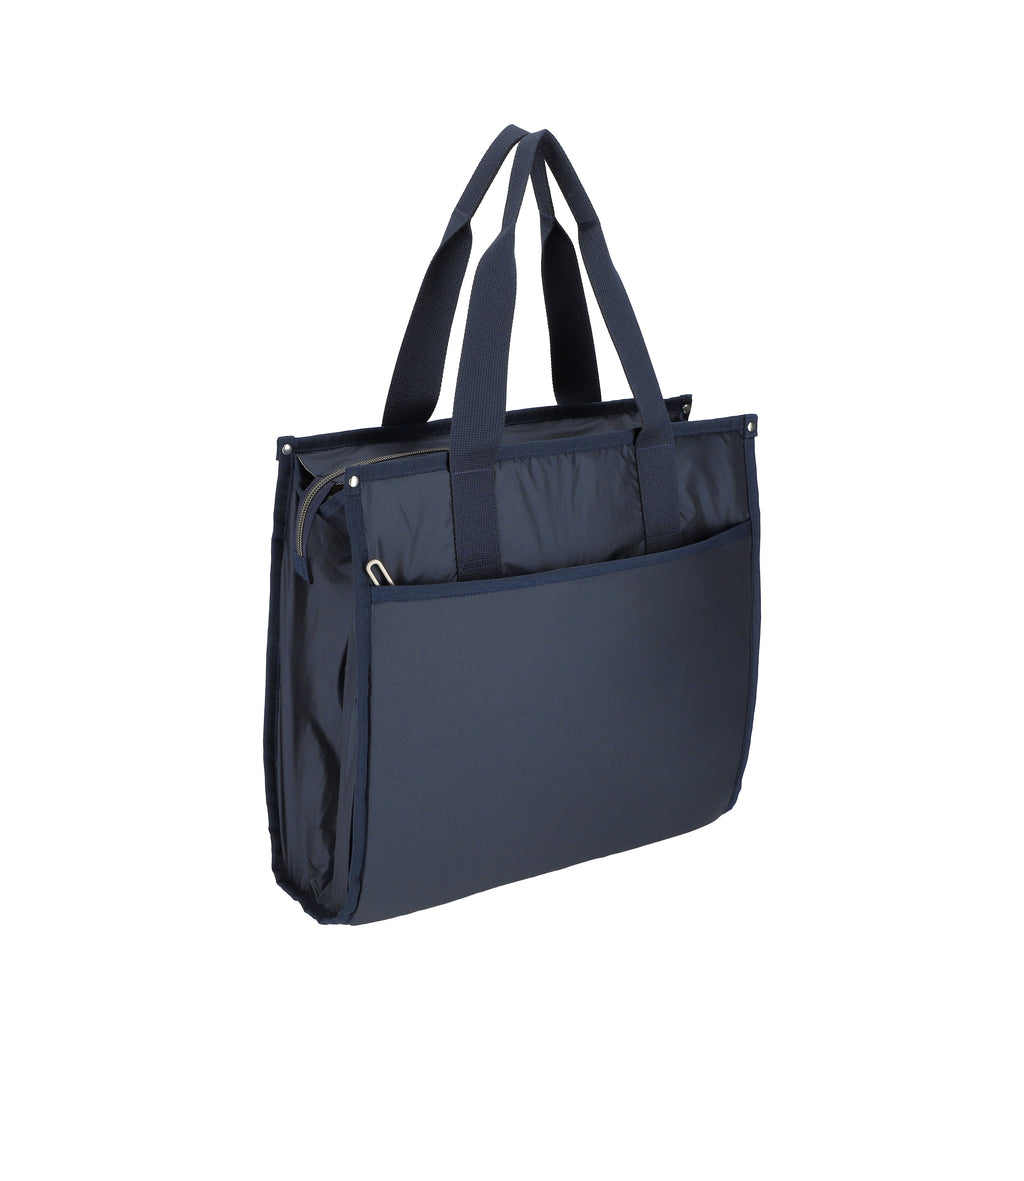 Soft Convertible Tote - 22148463263792